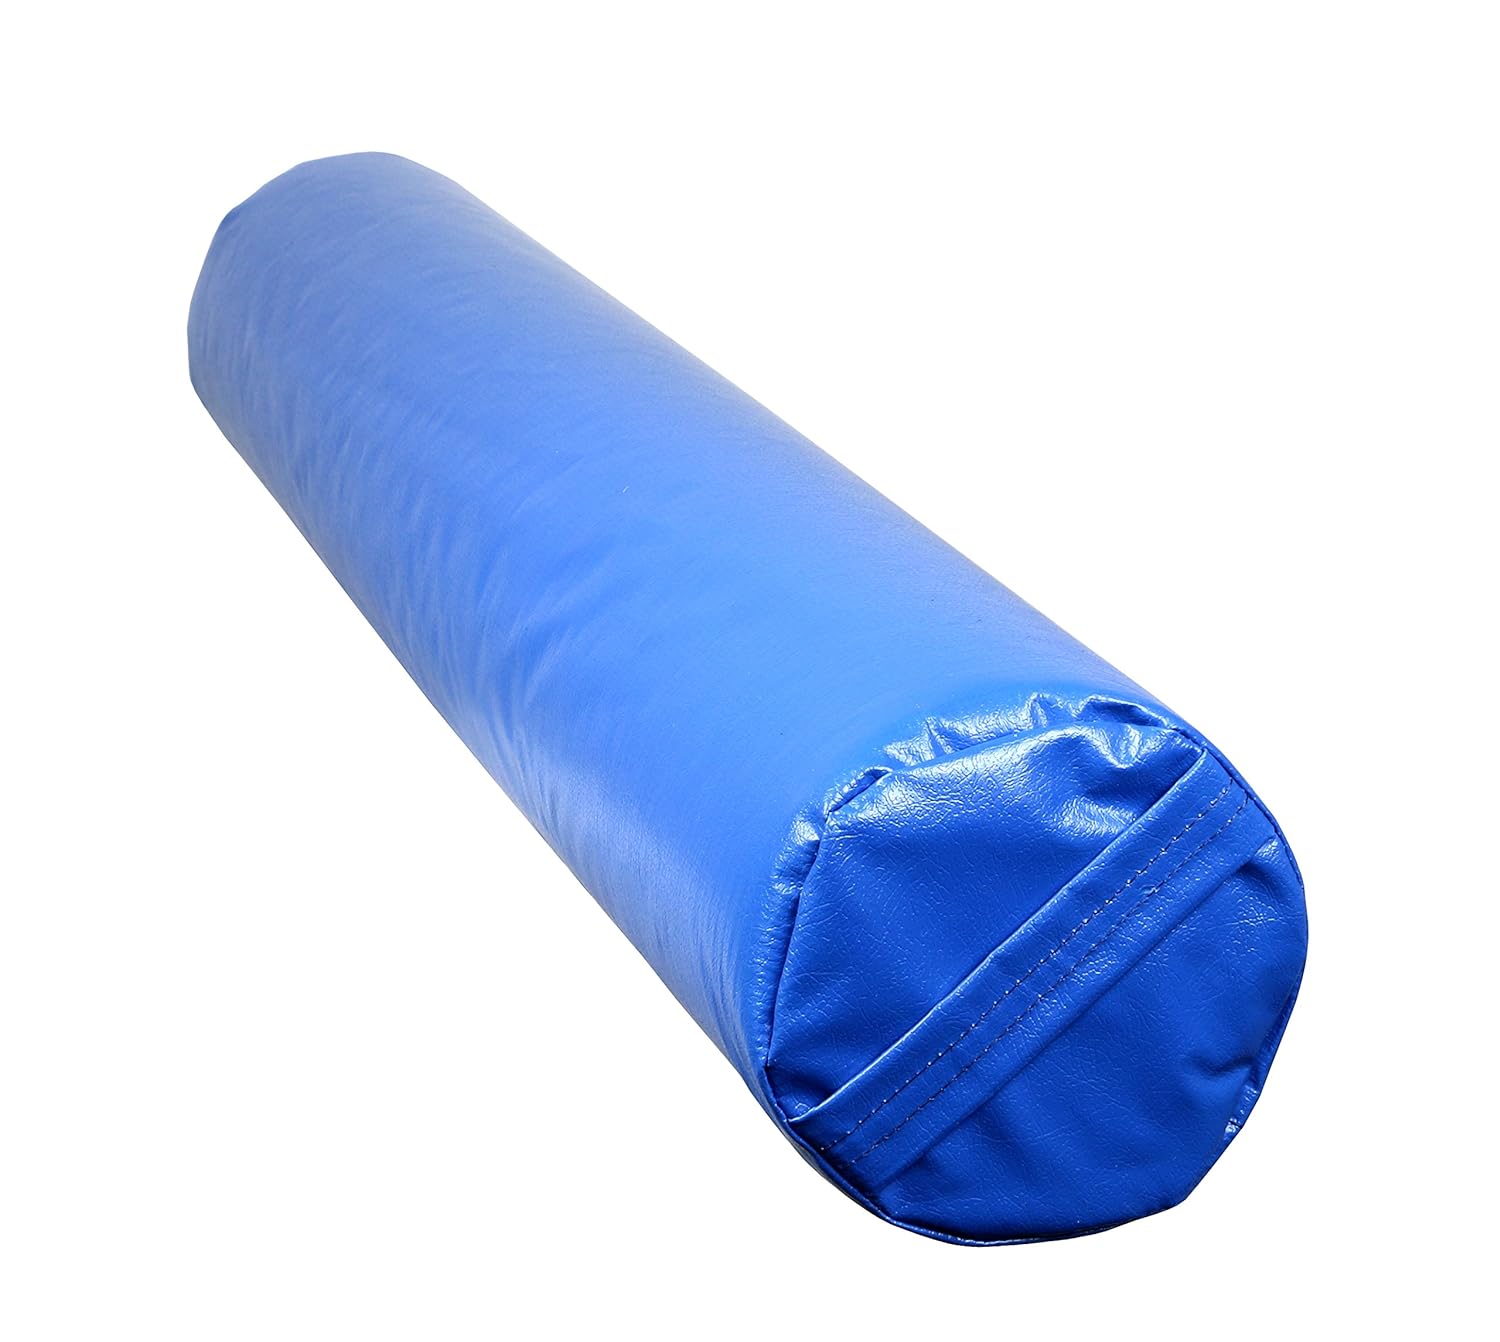 CanDo« Positioning Roll - Foam with vinyl cover - Soft - 36" x 6" Diameter - Specify Color